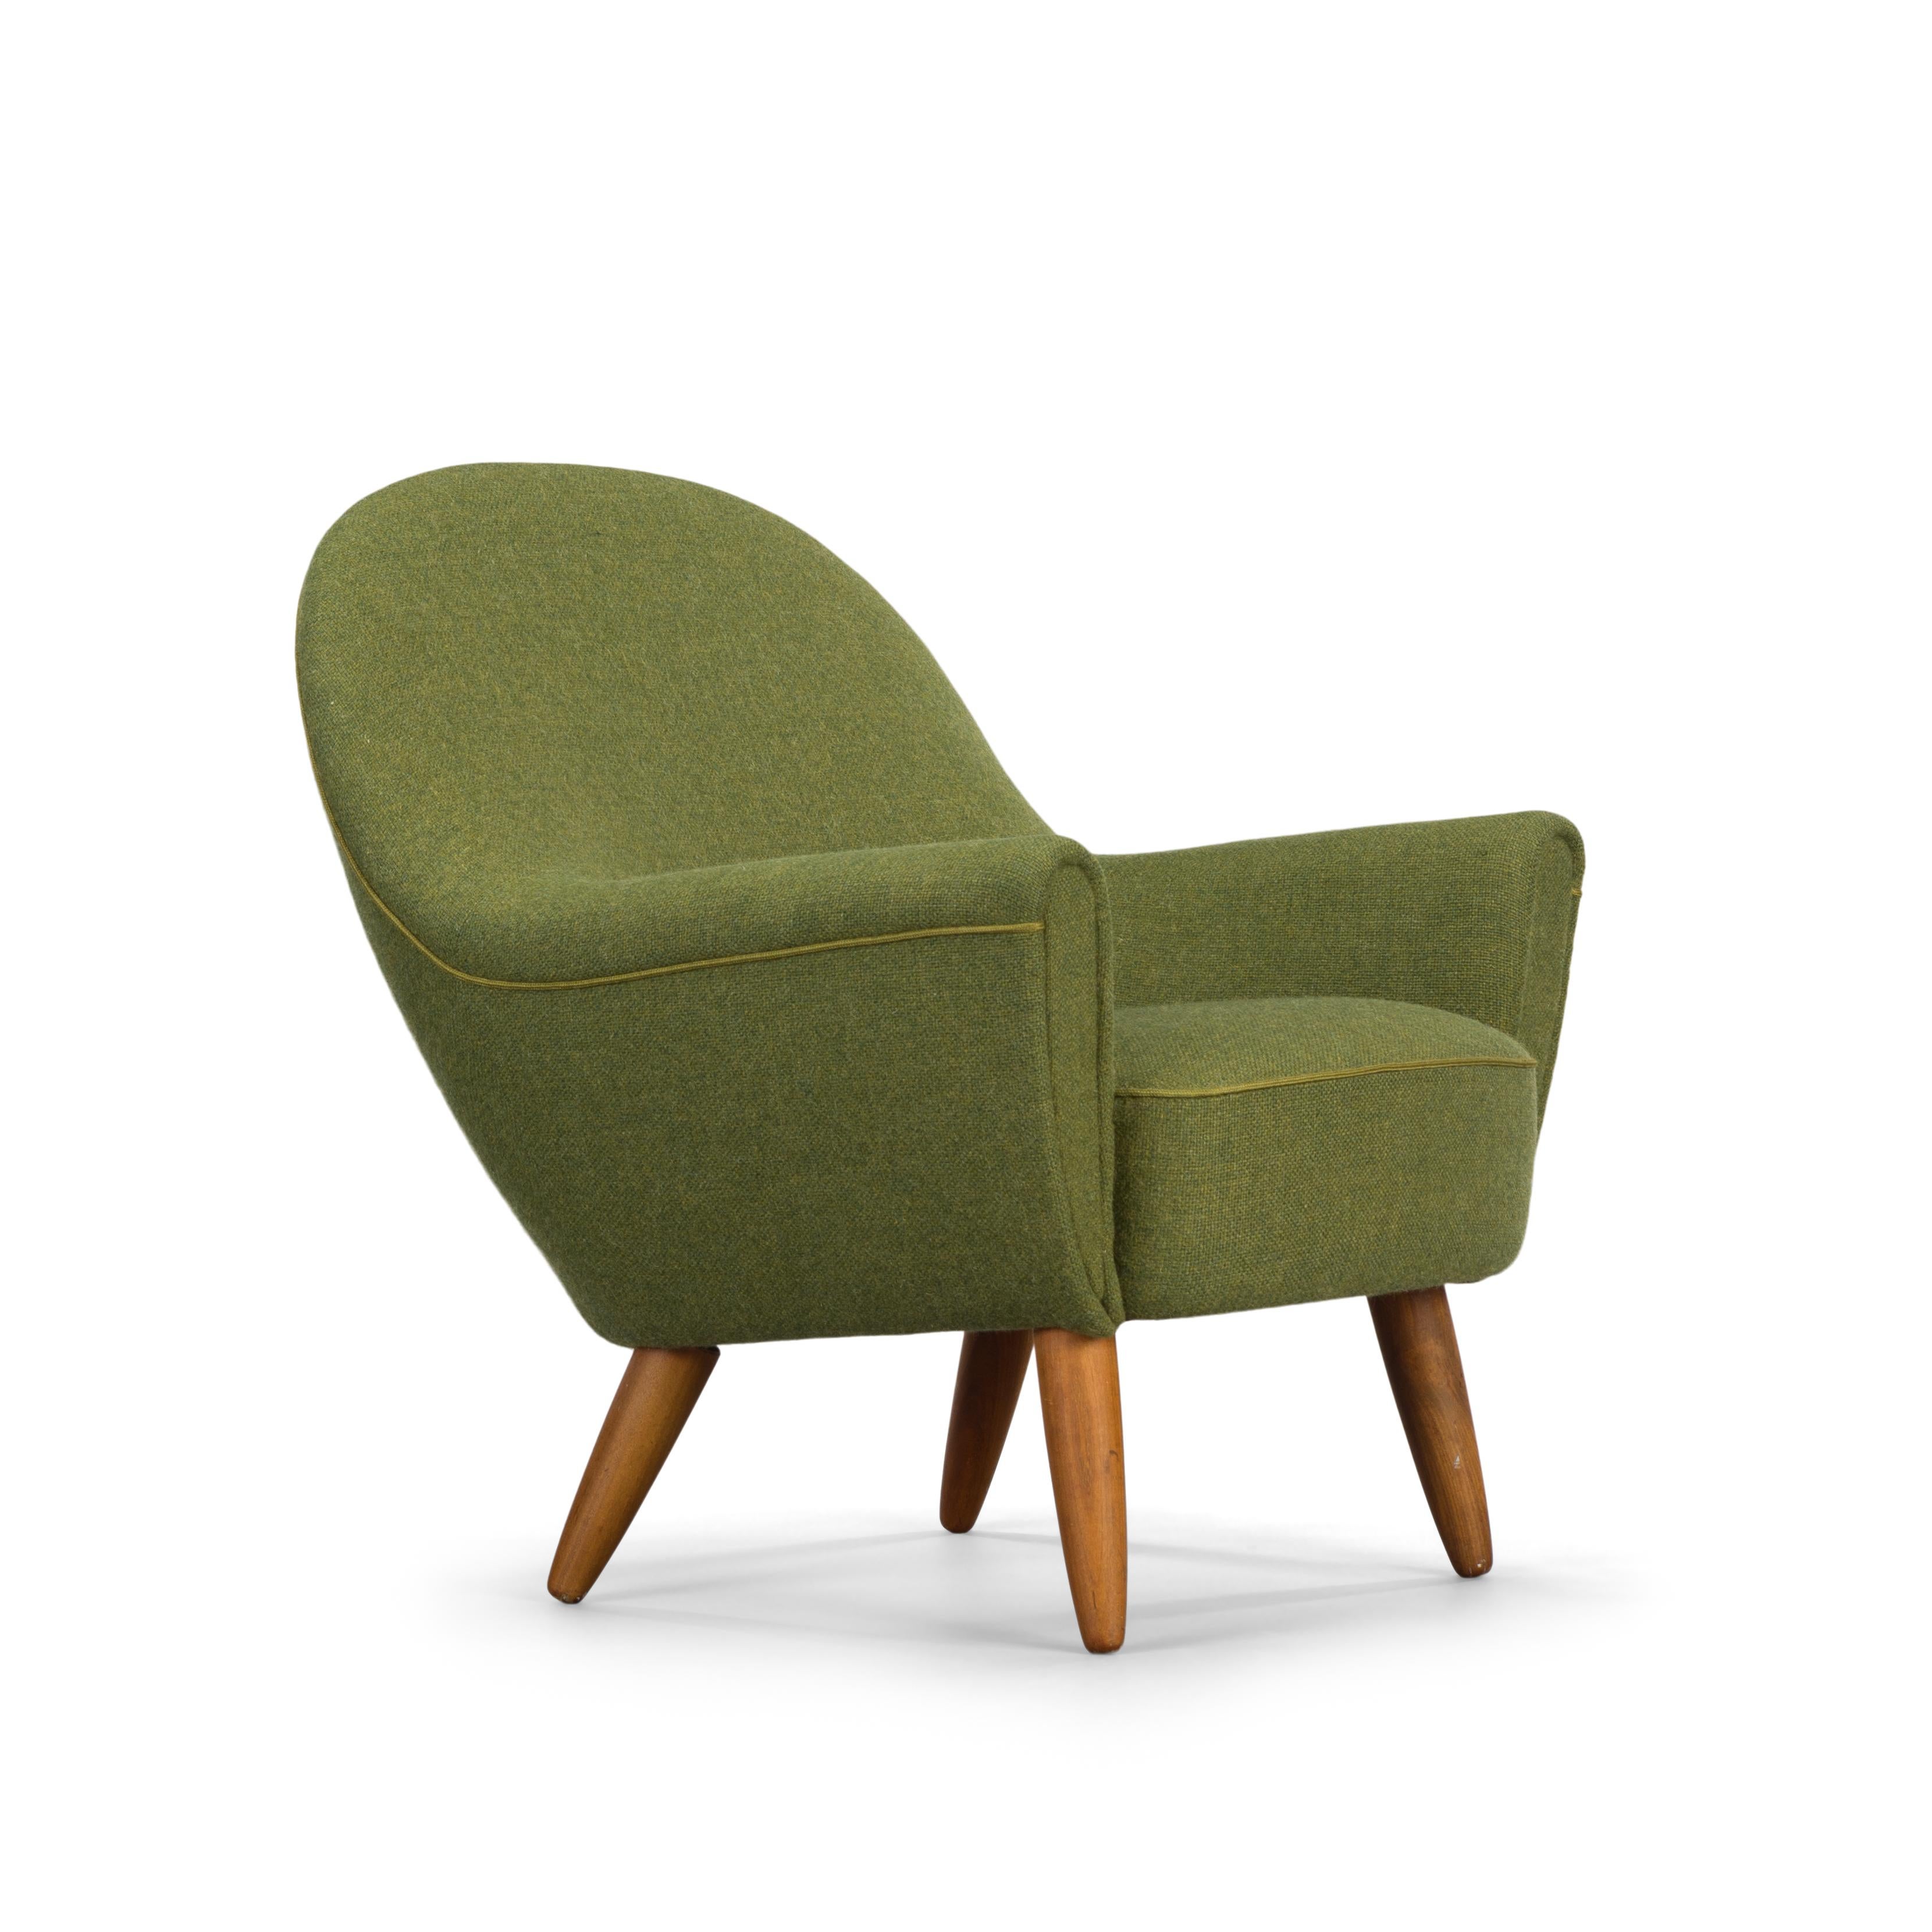 This comfy lounge chair slash cocktail chair has been designed by Johannes Andersen for CFC Silkeborg. The fabric on the chair is fully original and in remarkably good shape. The recognizable Andersen design style of the chair front was used